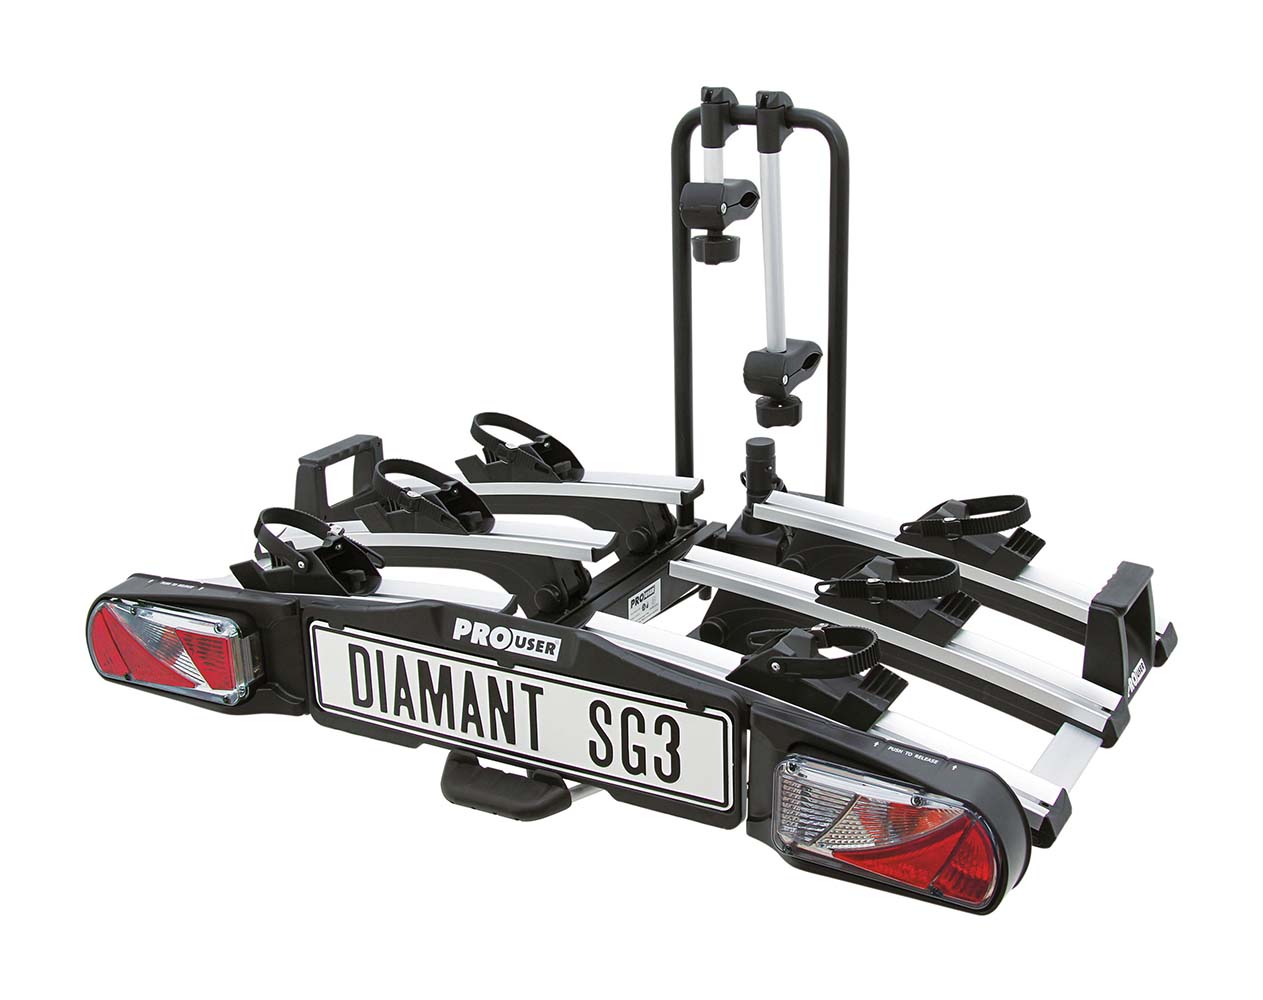 5191735 An extremely user-friendly and modern cycle rack for transporting 3 bikes. Suitable for nearly all tow bars, all bikes (including e-bikes) and all tyre sizes. An ingenious folding system makes the cycle rack extremely easy to carry, store and mount on a tow bar. The boot is still accessible thanks to the easy to operate tilting mechanism on the cycle rack. This makes the cycle rack easy and quick to unlock using a foot pedal. The bikes stand in a wide wheel cradle, with a frame lock with flexible lockable and removable frame holders. After use, this cycle rack can be folded extremely compactly and stored in the storage cover supplied. The connector for the lights works using a combined 7 and 13 pole (Jaeger) plug (including rear mist light and reverse lighting). Has European Type Approval granted by the RDW (Dutch Vehicle Authority). Maximum load bearing capacity: 60kg.